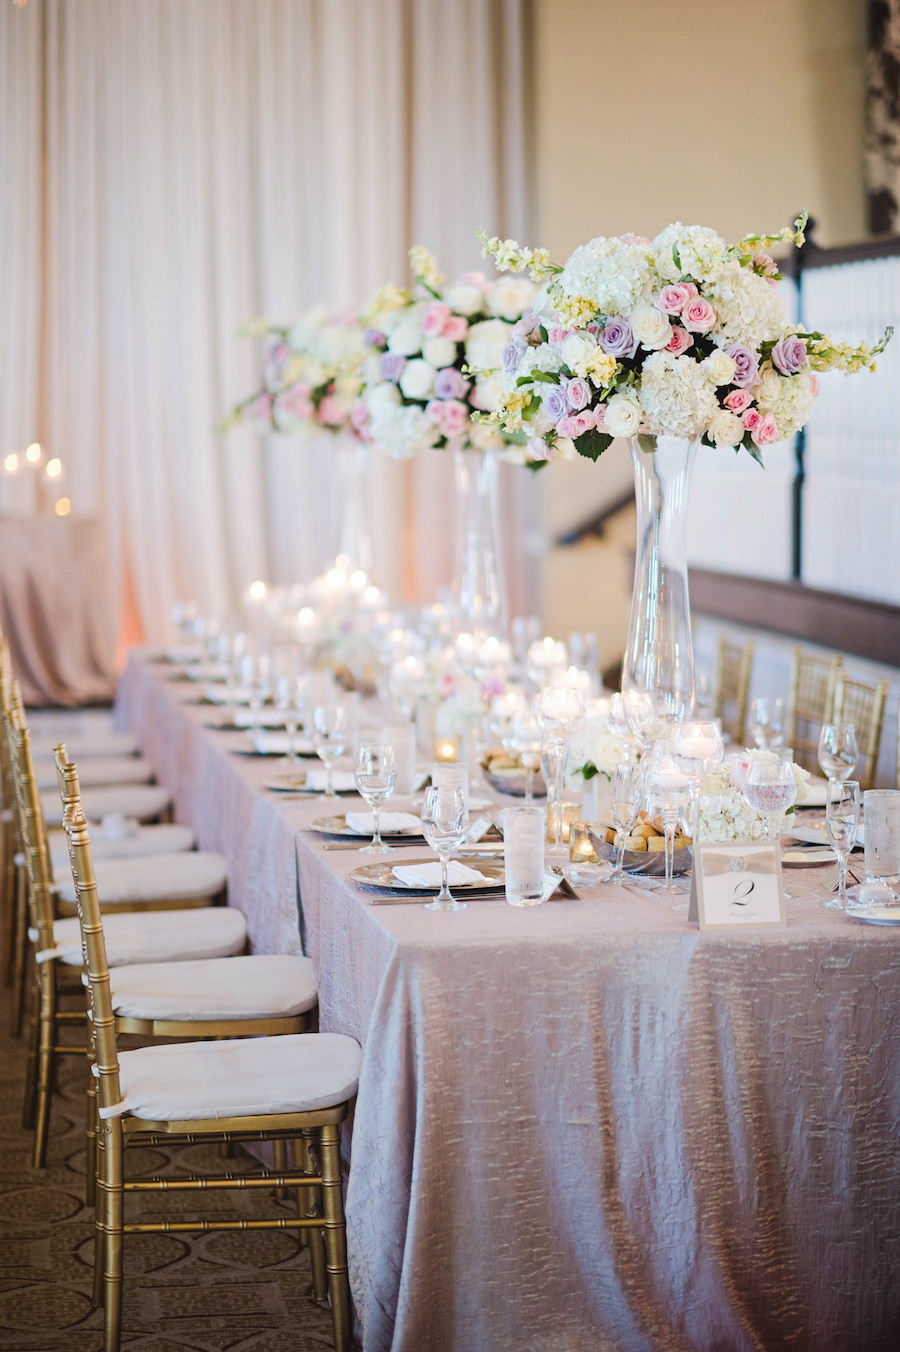 Classic Wedding Reception with Tall Pink, Cream and Lilac Rose and Hydrangea Centerpieces on Feasting Tables at Tampa Wedding Reception Venue Loews Don Cesar Hotel | Tampa Wedding Photographer Marc Edwards Photographs